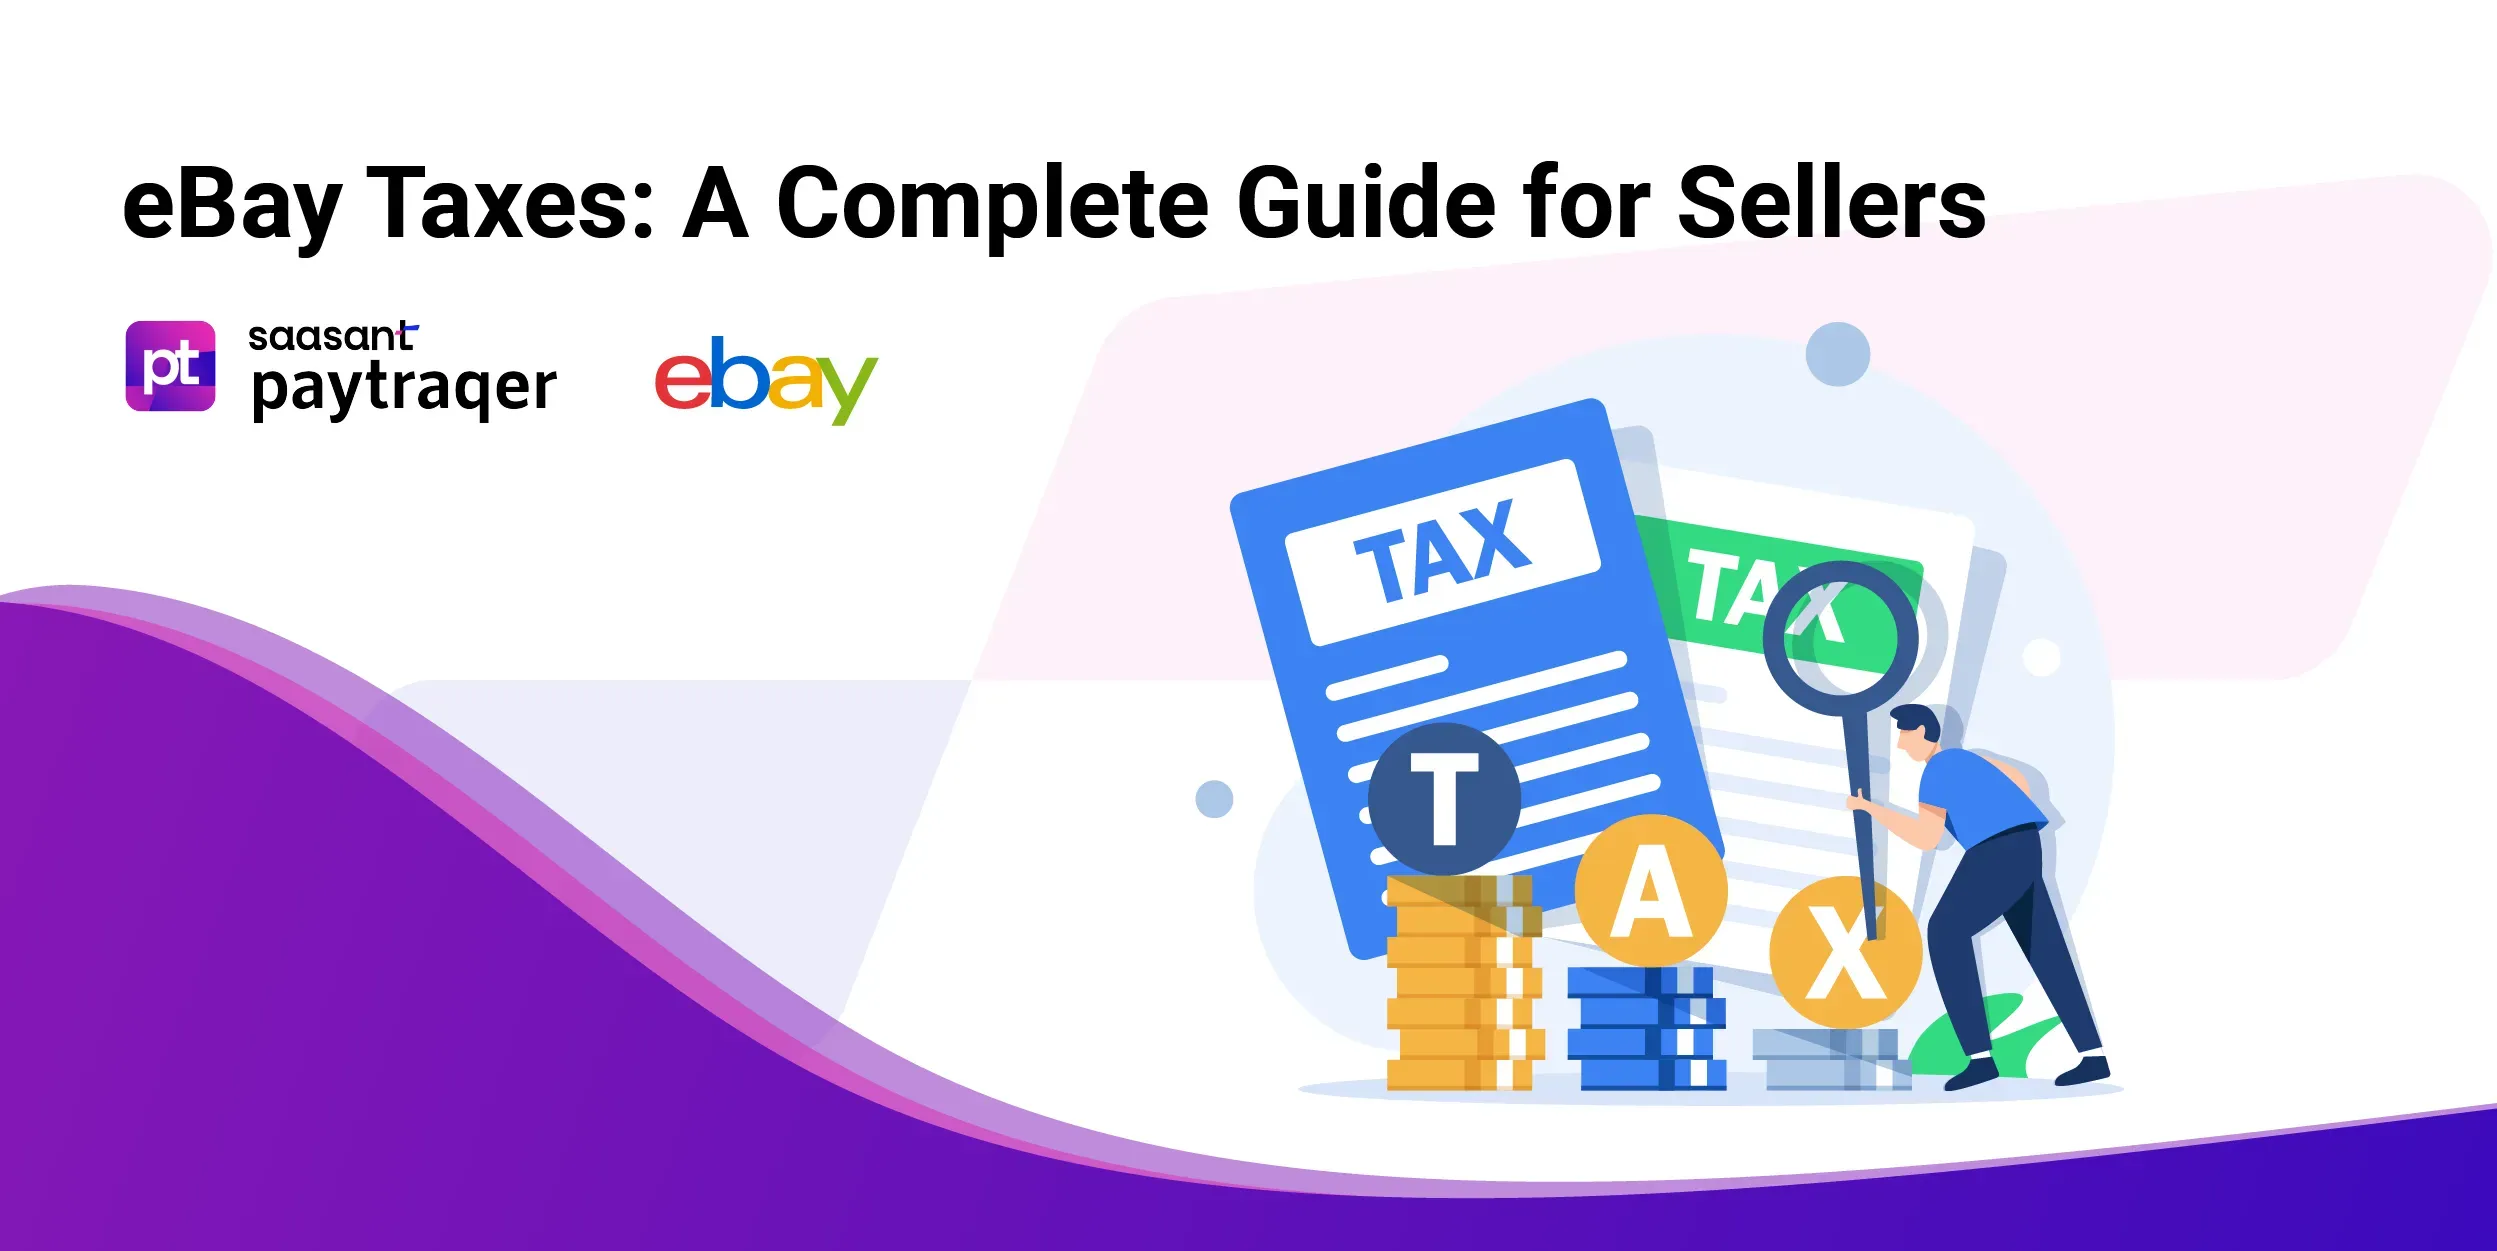 eBay Taxes: A Complete Guide for Sellers